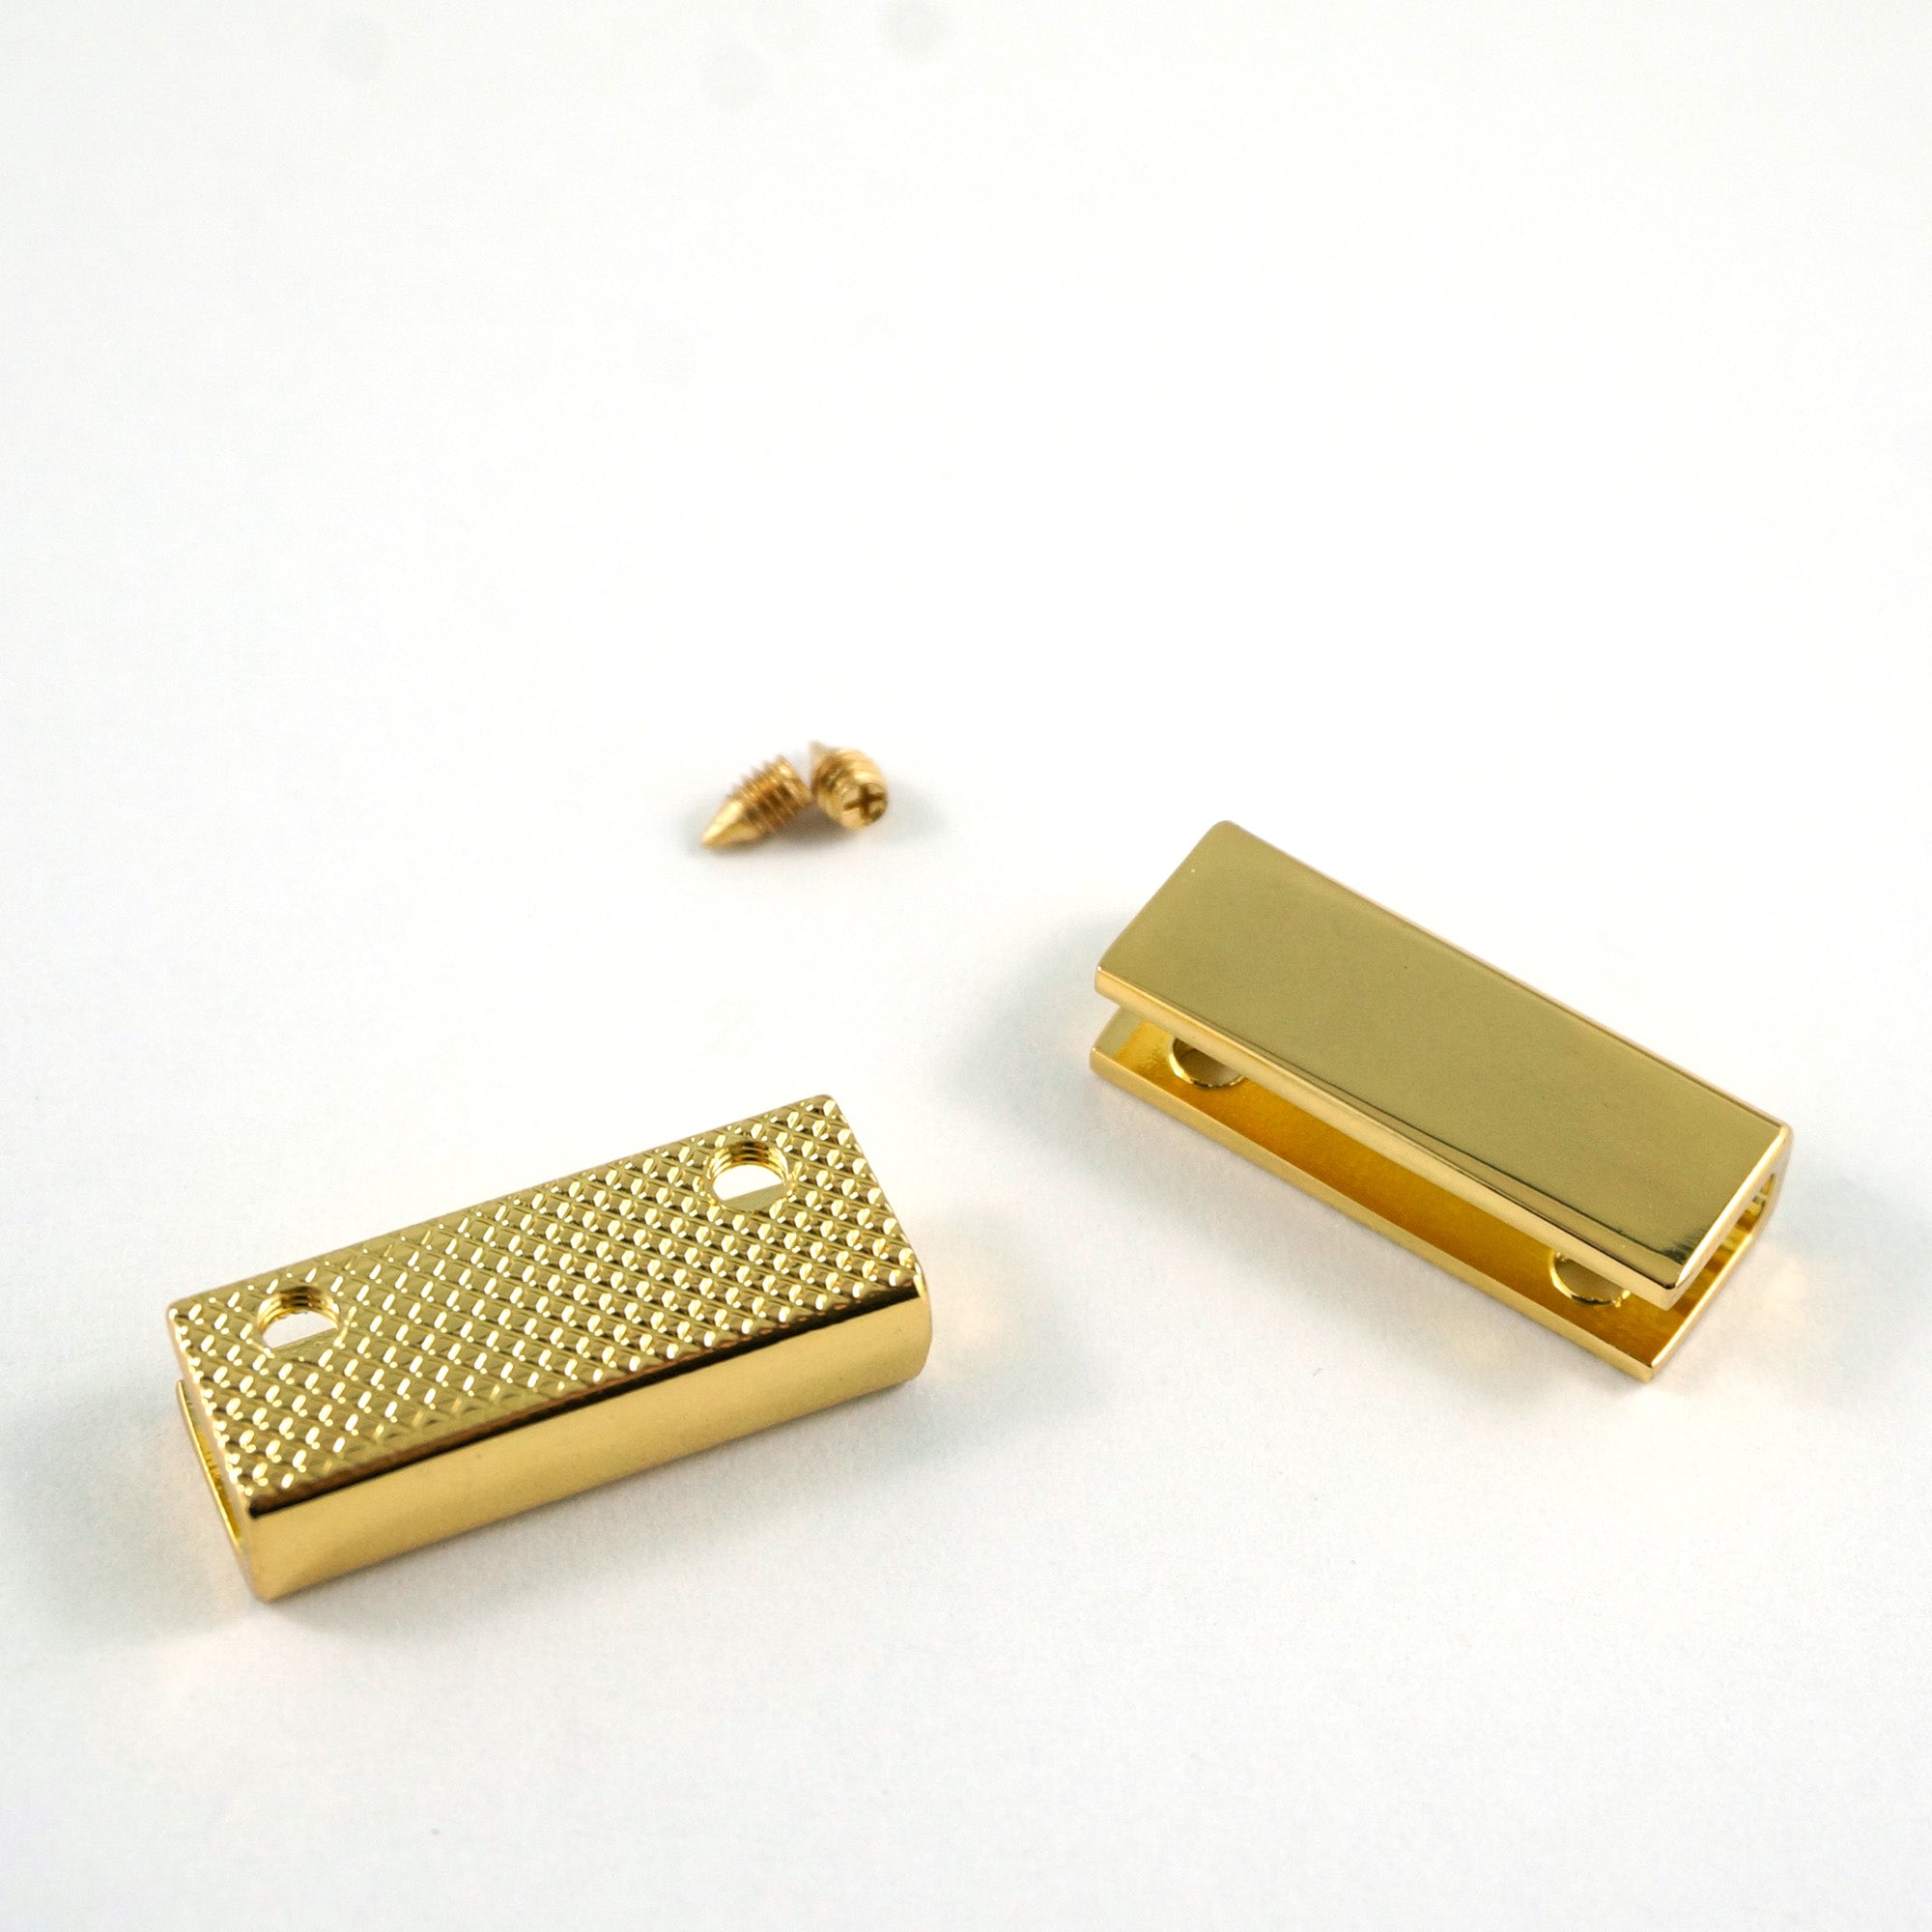 Rectangular Strap End Caps Gold (1&quot; wide) (4 Pack)